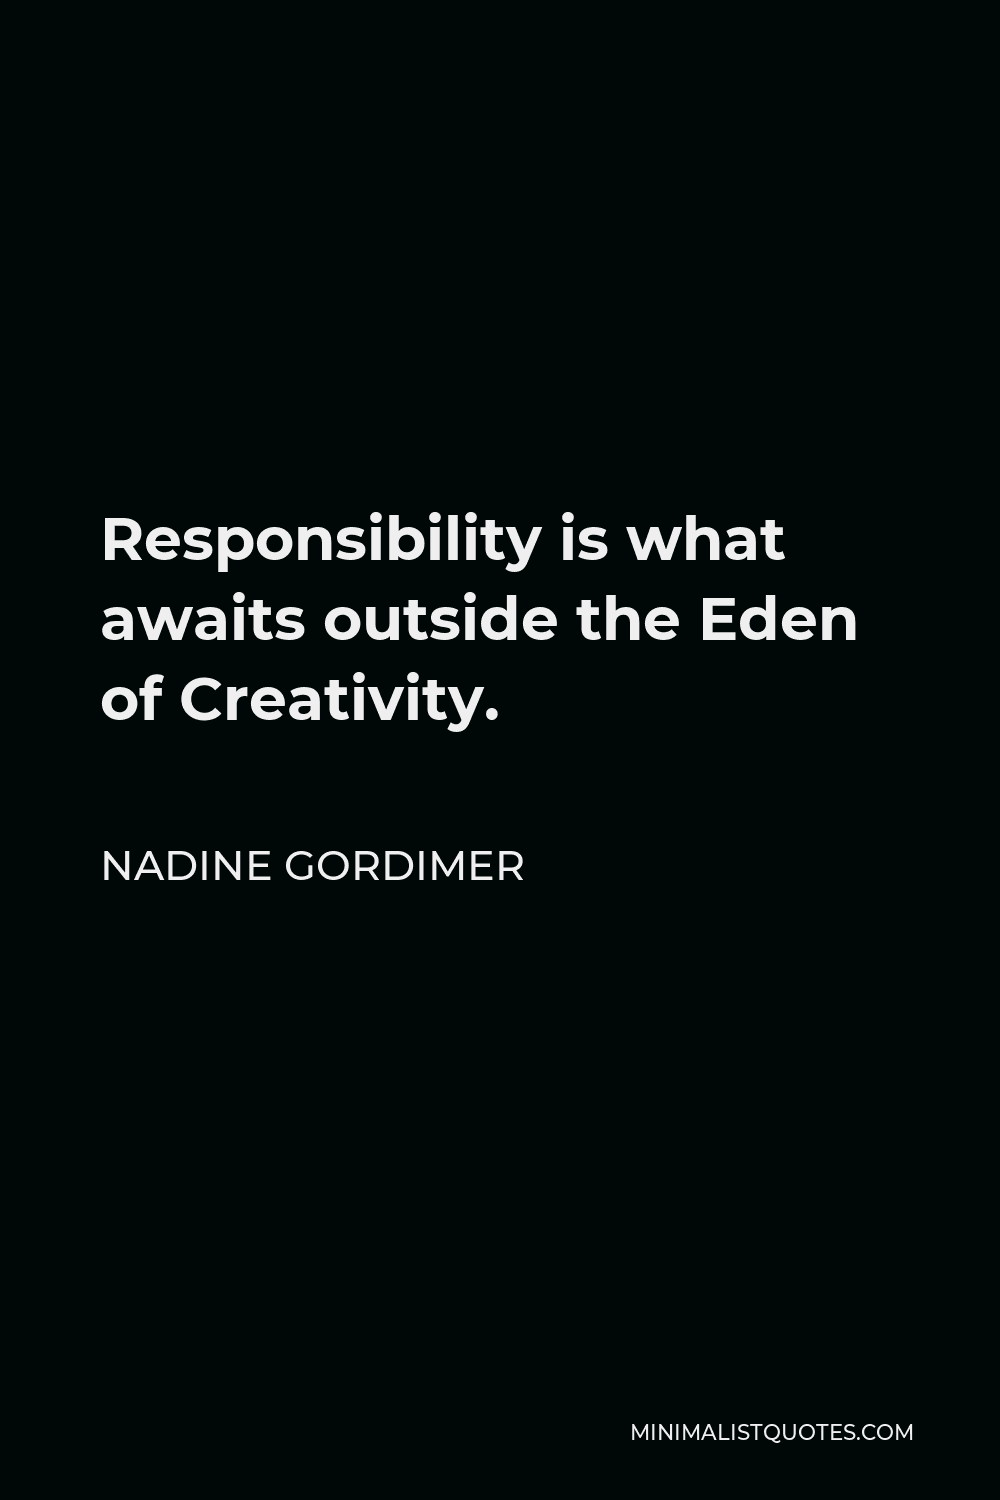 Nadine Gordimer Quote - Responsibility is what awaits outside the Eden of Creativity.